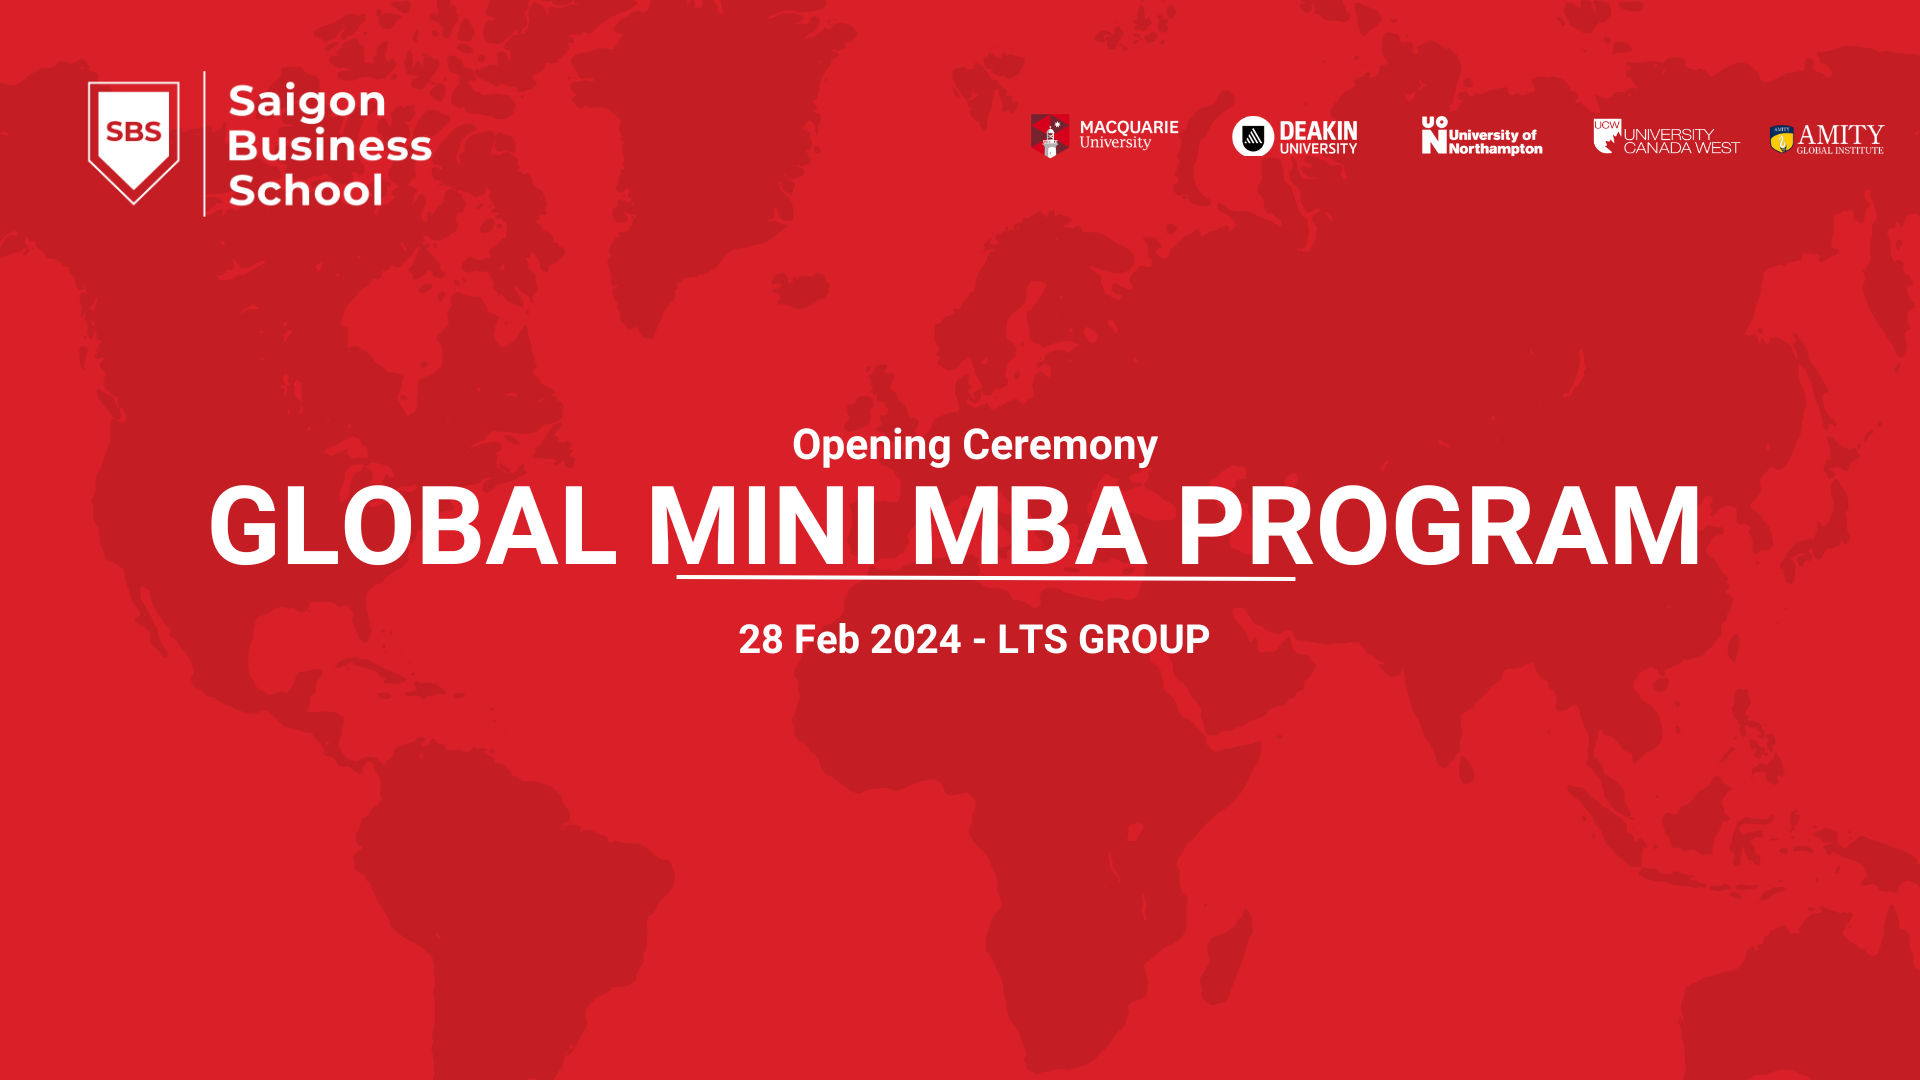 Grand Opening of the first Global Mini MBA Program for Enterprises - LTS Group (LTS Group)